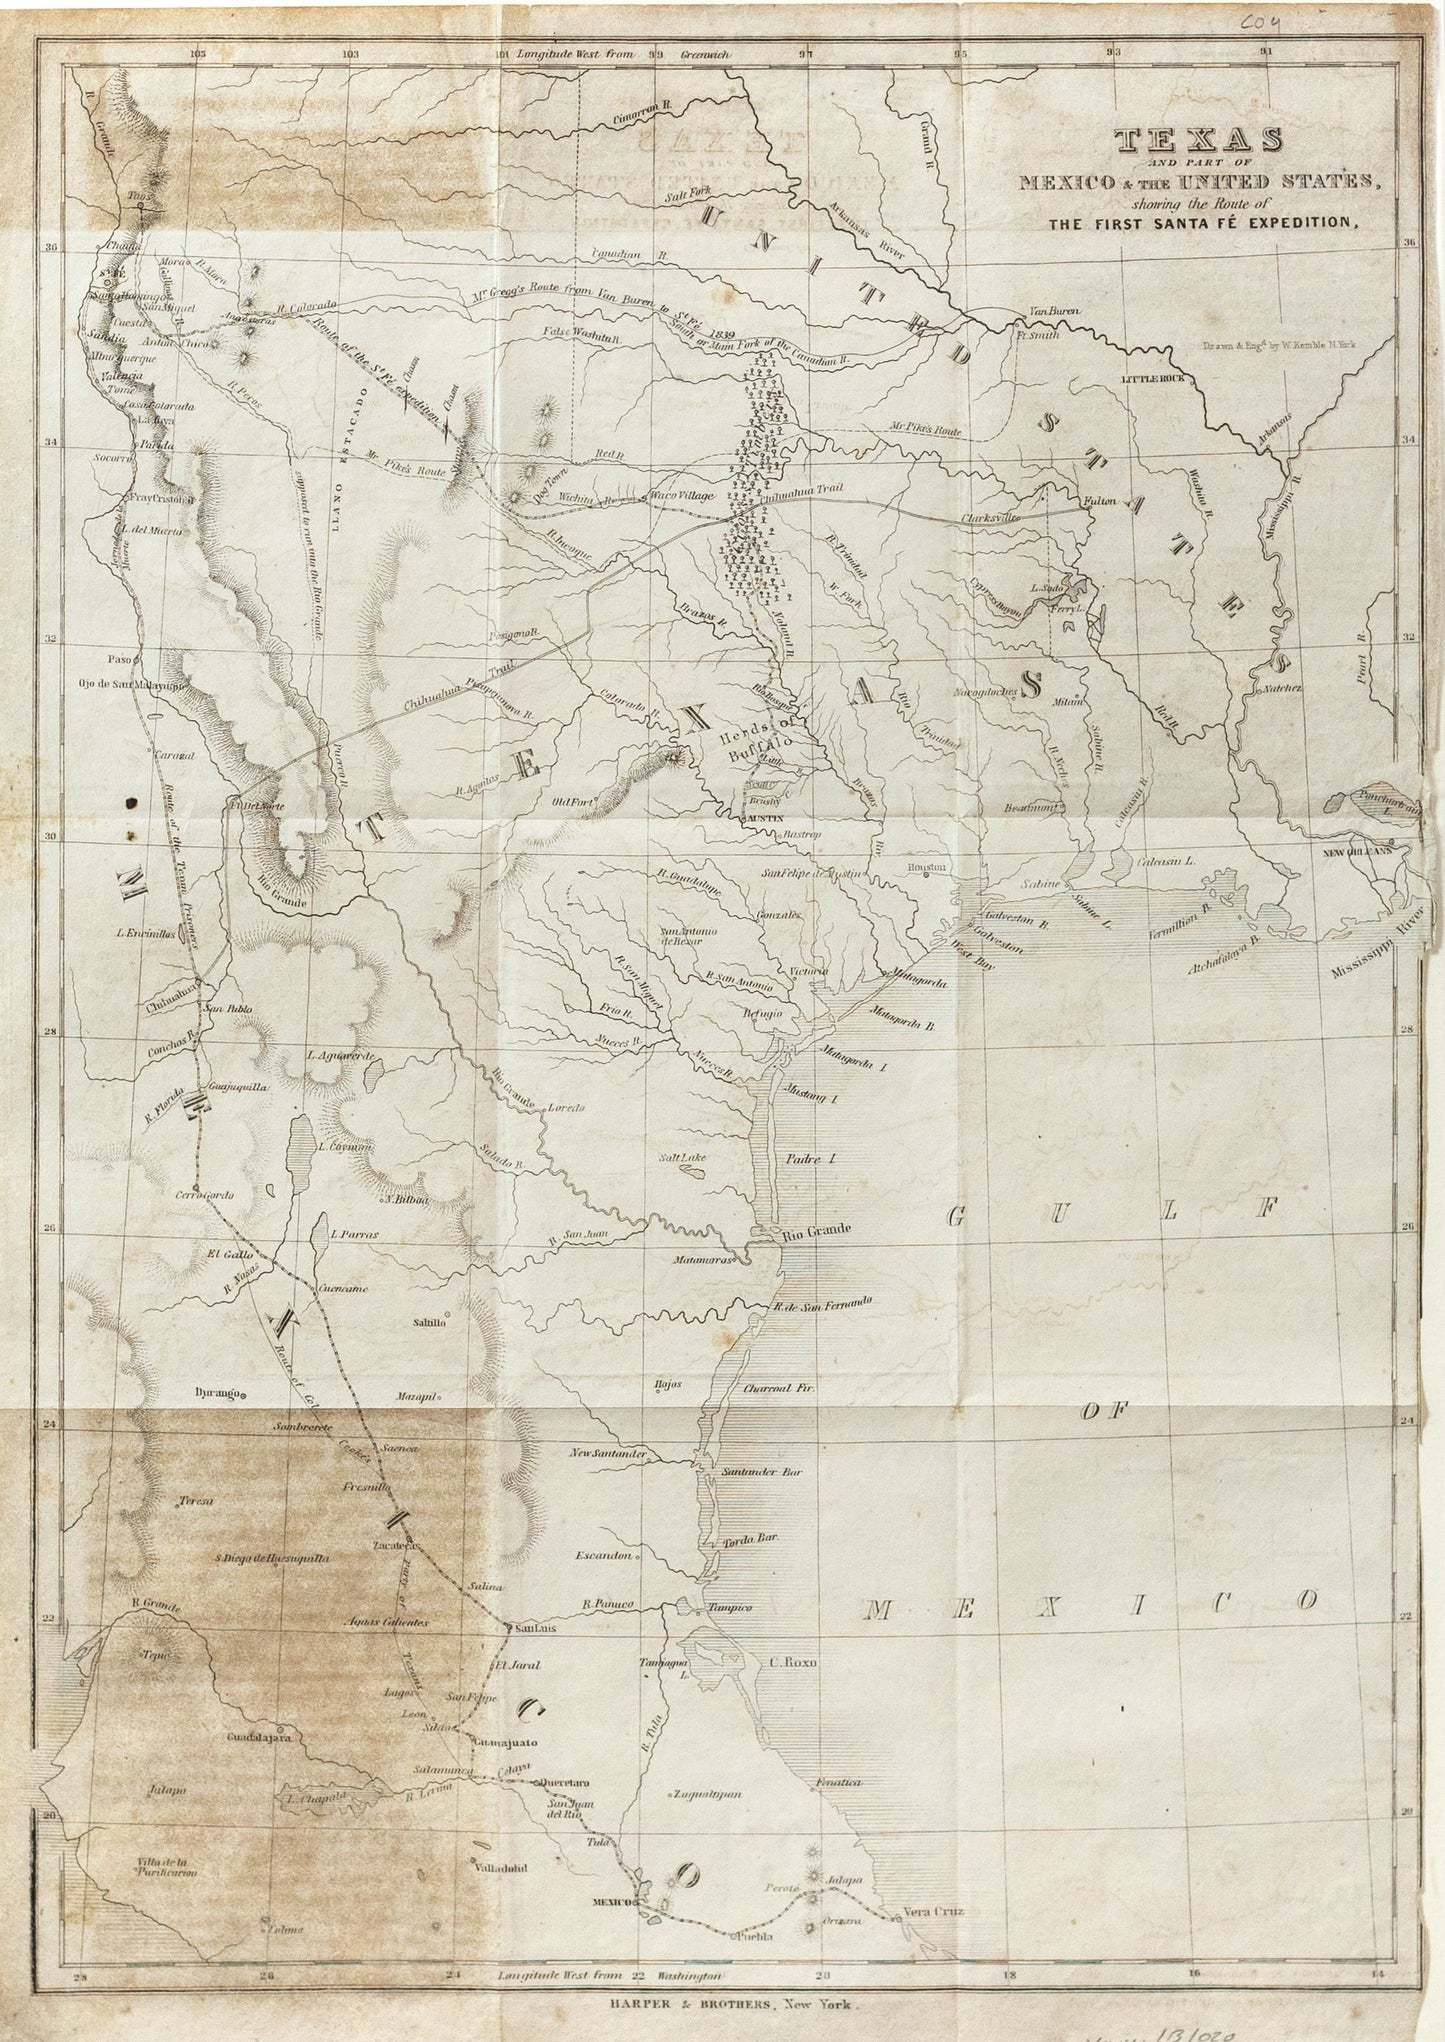 Kemble, W. Texas and part of Mexico & the United States, showing the route of the first Sante Fe expedition. New York, 1844.